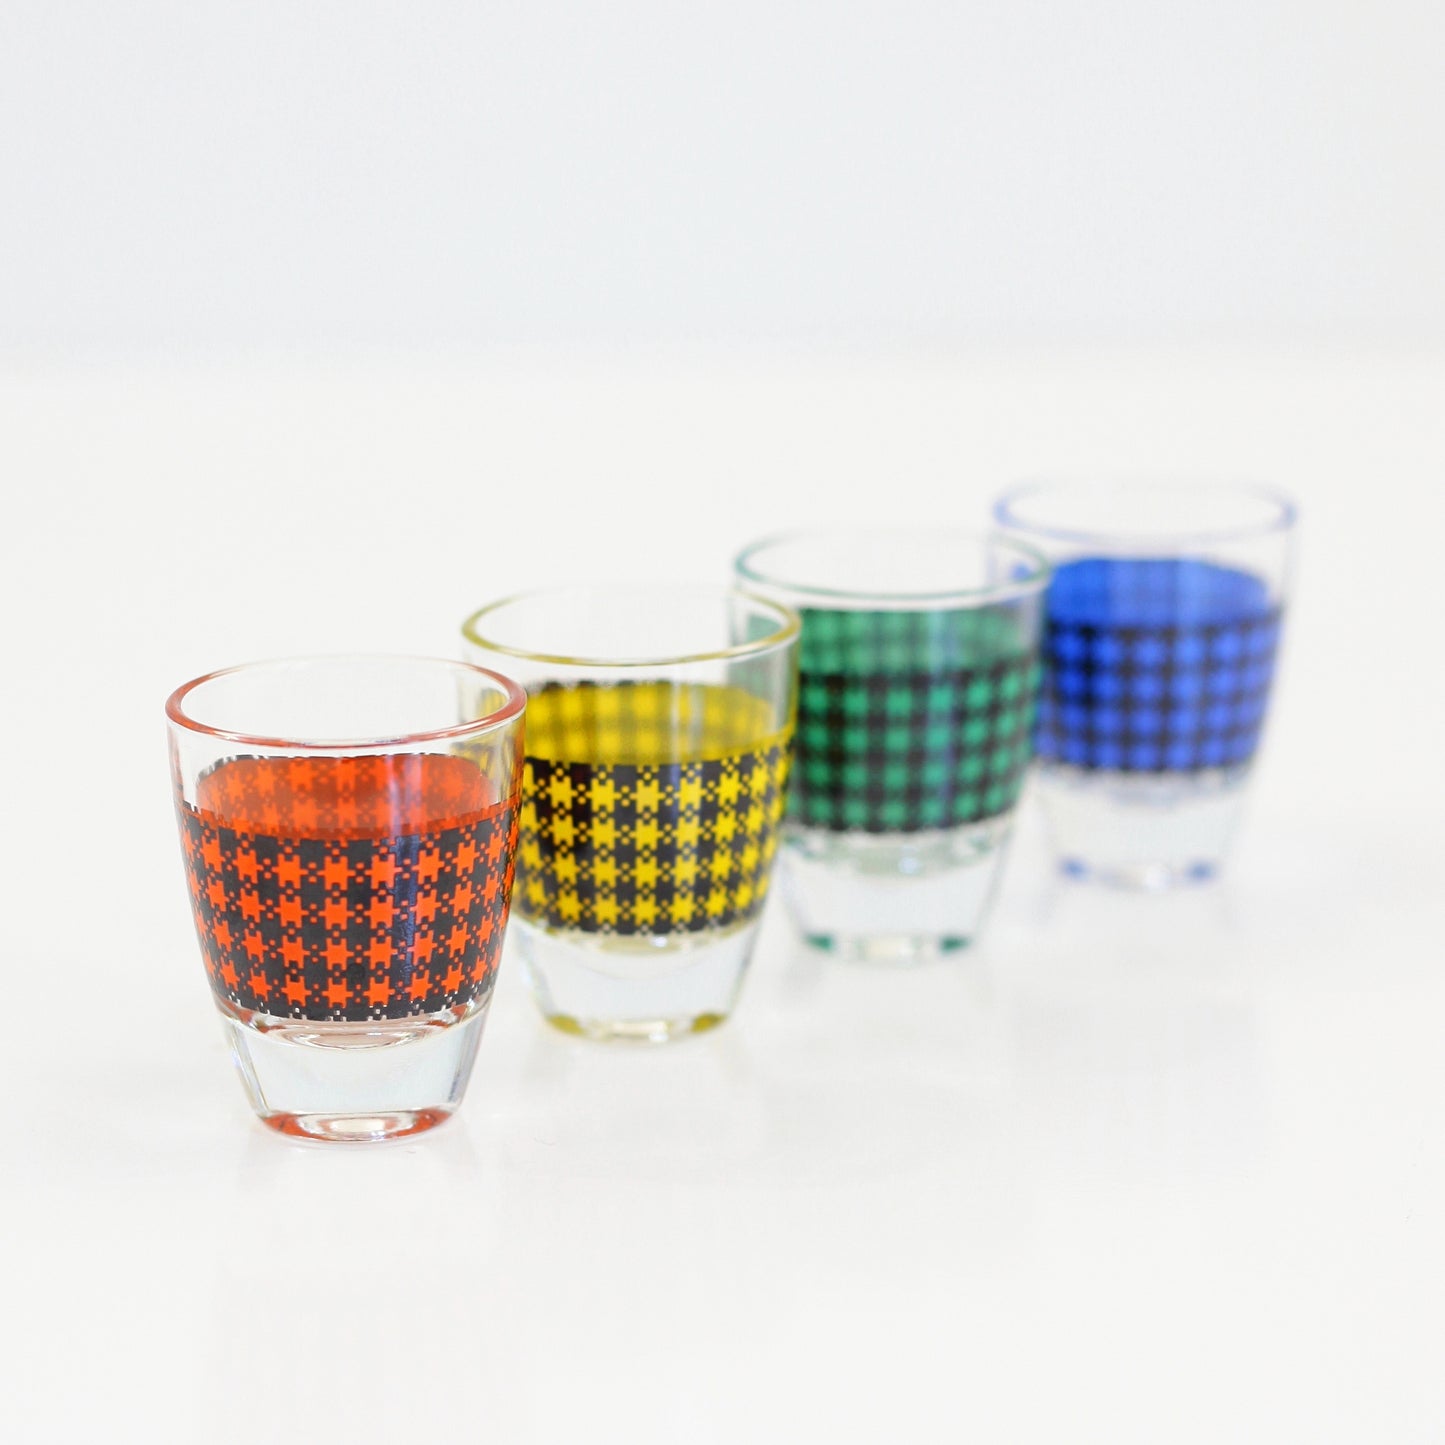 SOLD - Mid Century Houndstooth Shot Glasses & Decanter Set from France